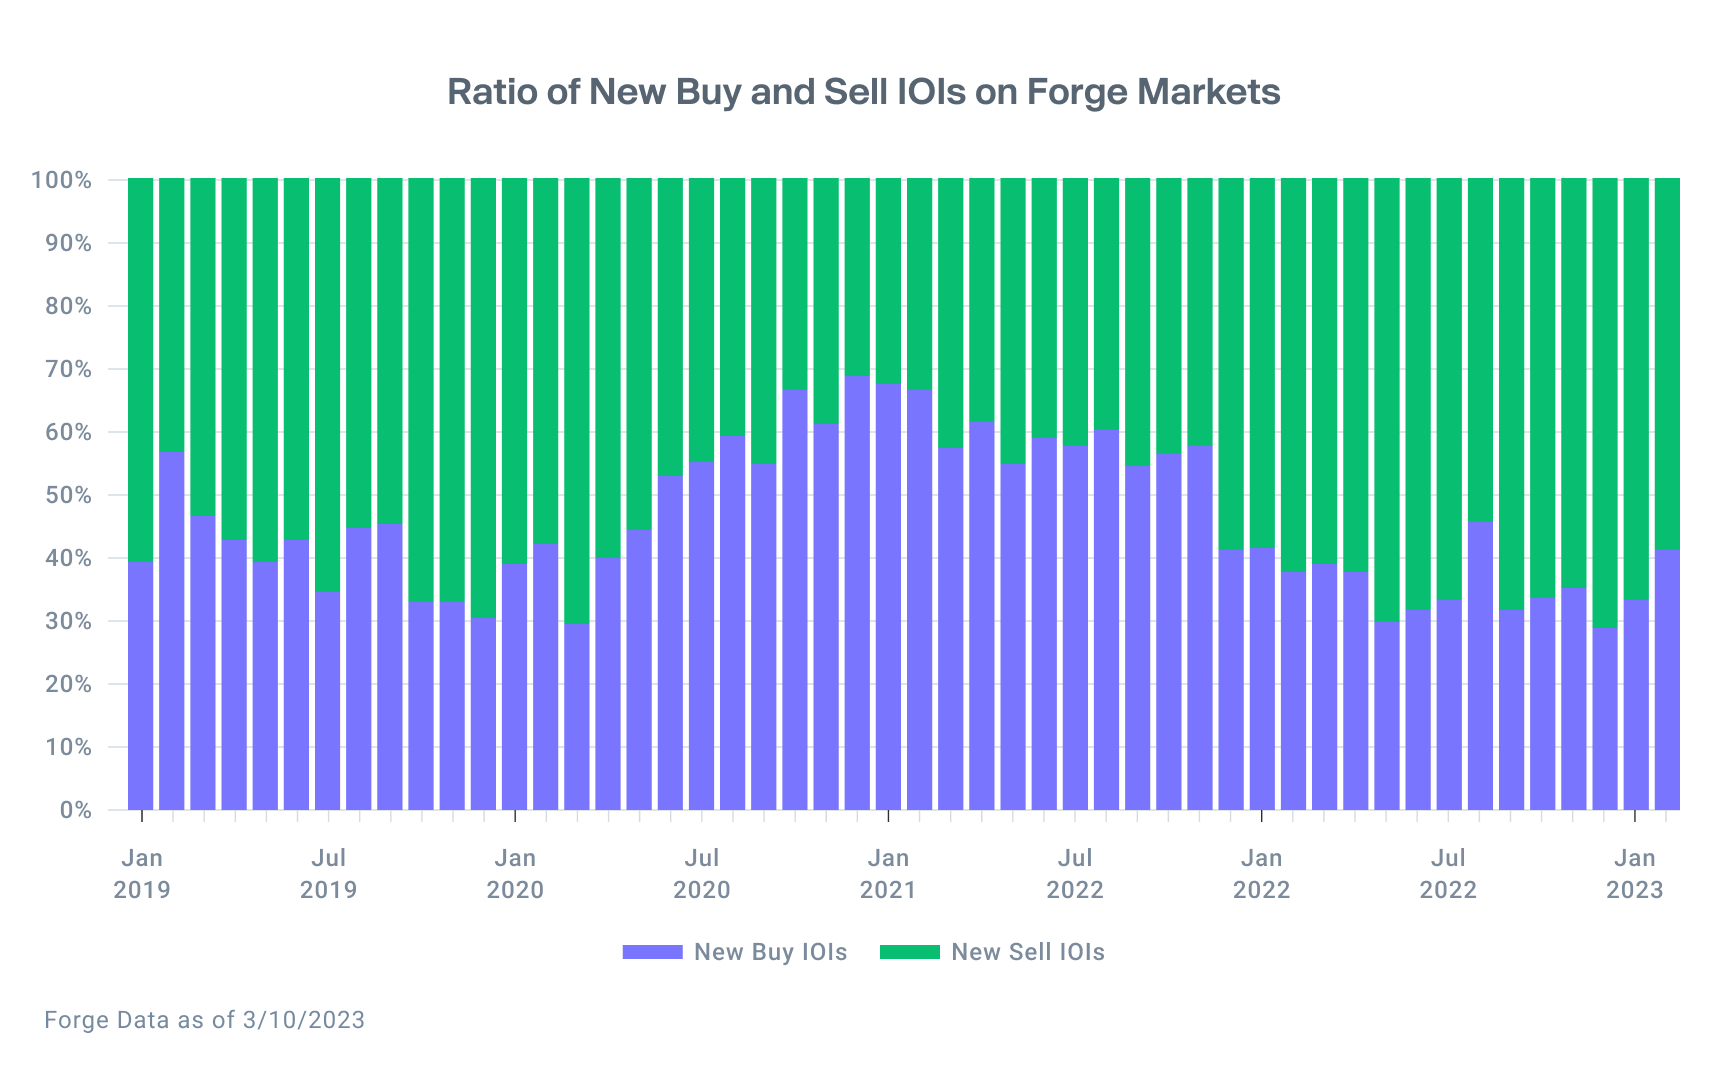 Chart shows the distribution of Buy and Sell IOIs on Forge Markets with an increase of Buy IOIs in February